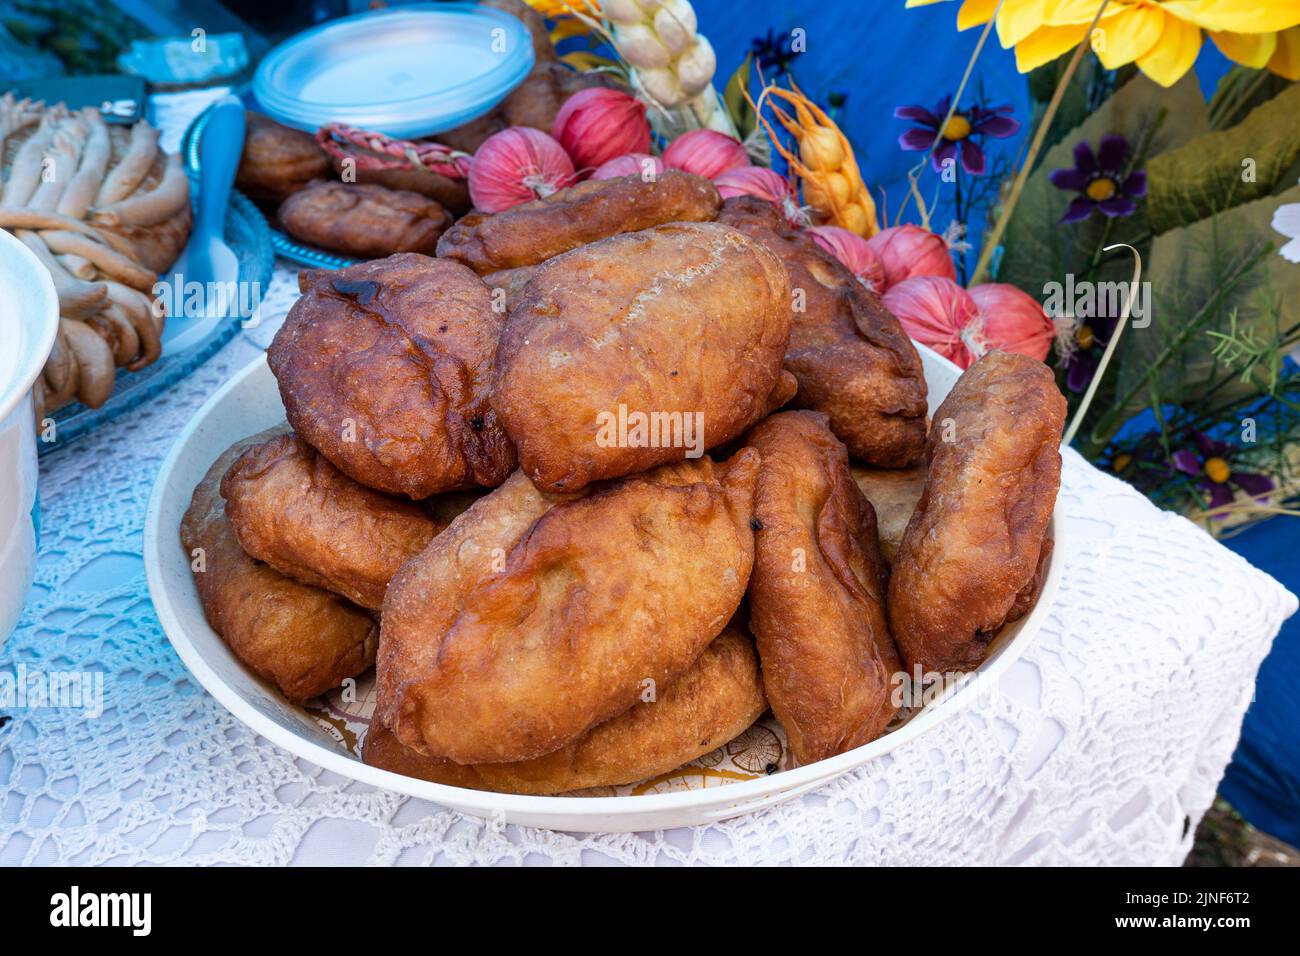 Homemade fried pies on a plate on the table. Stock Photo